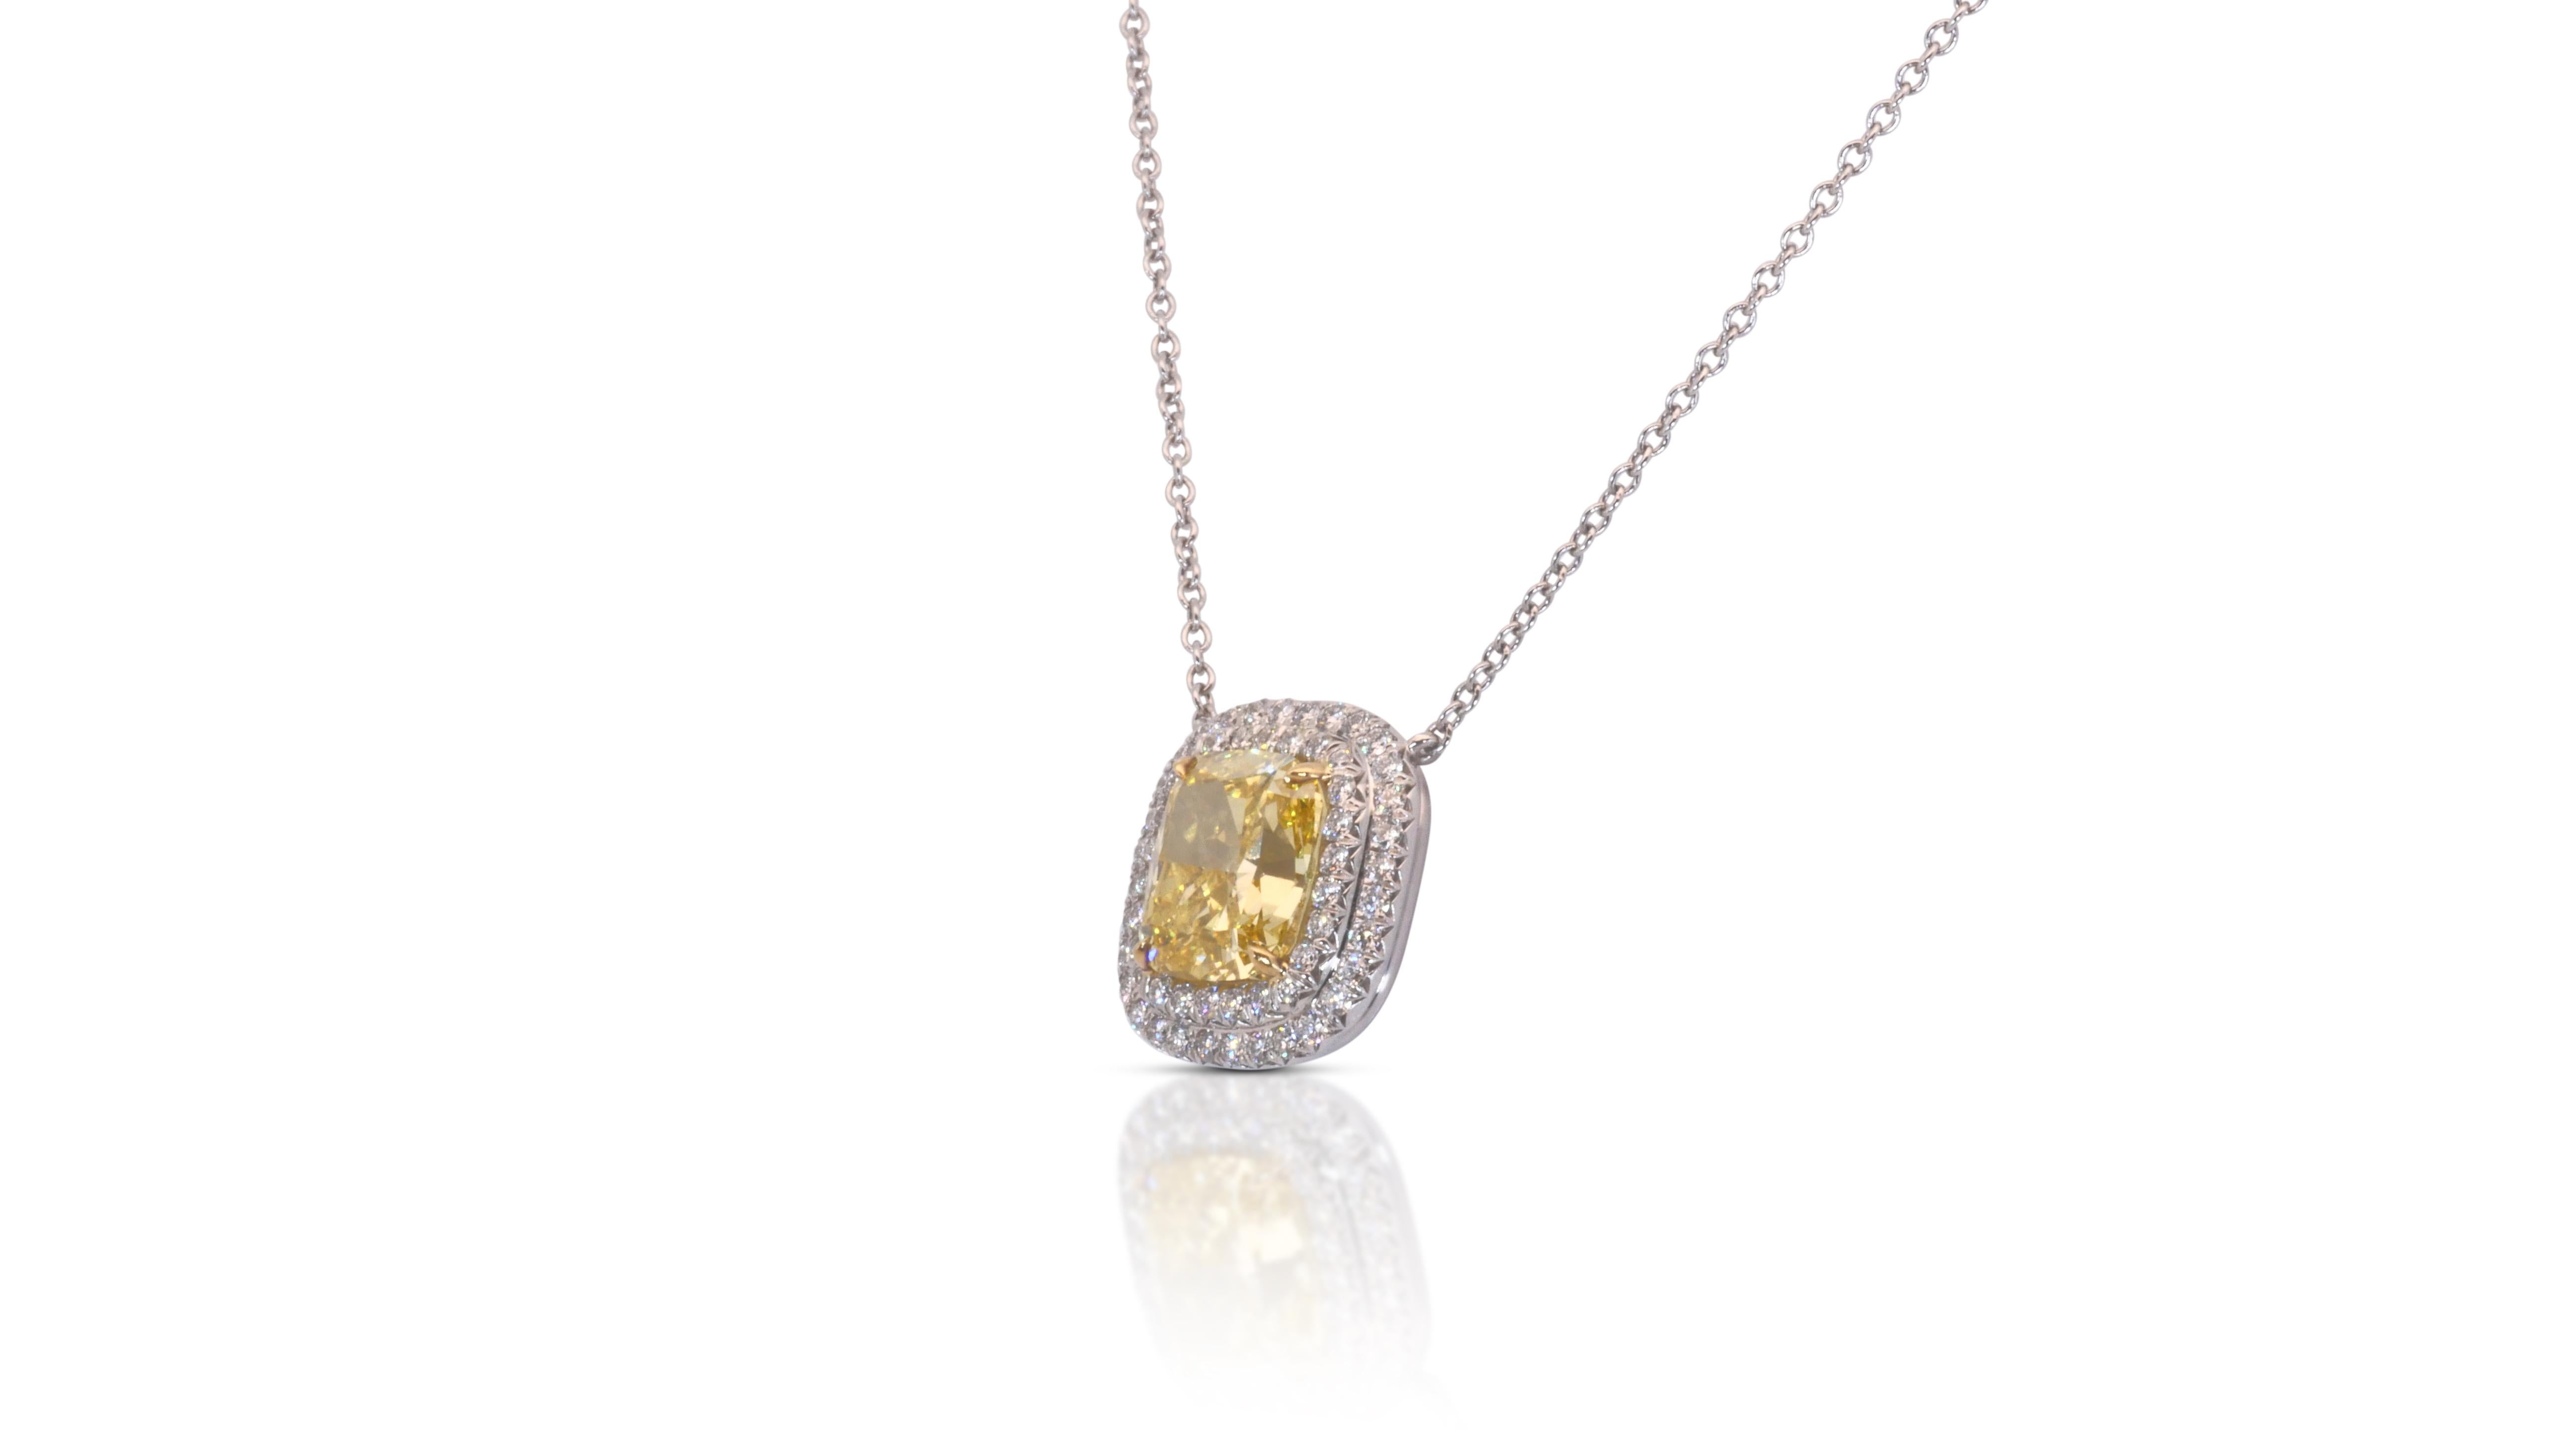 18k White Gold Necklace & Platinum Pendant 3.26ct Natural Diamonds TIFANNY&CO. In Excellent Condition For Sale In רמת גן, IL